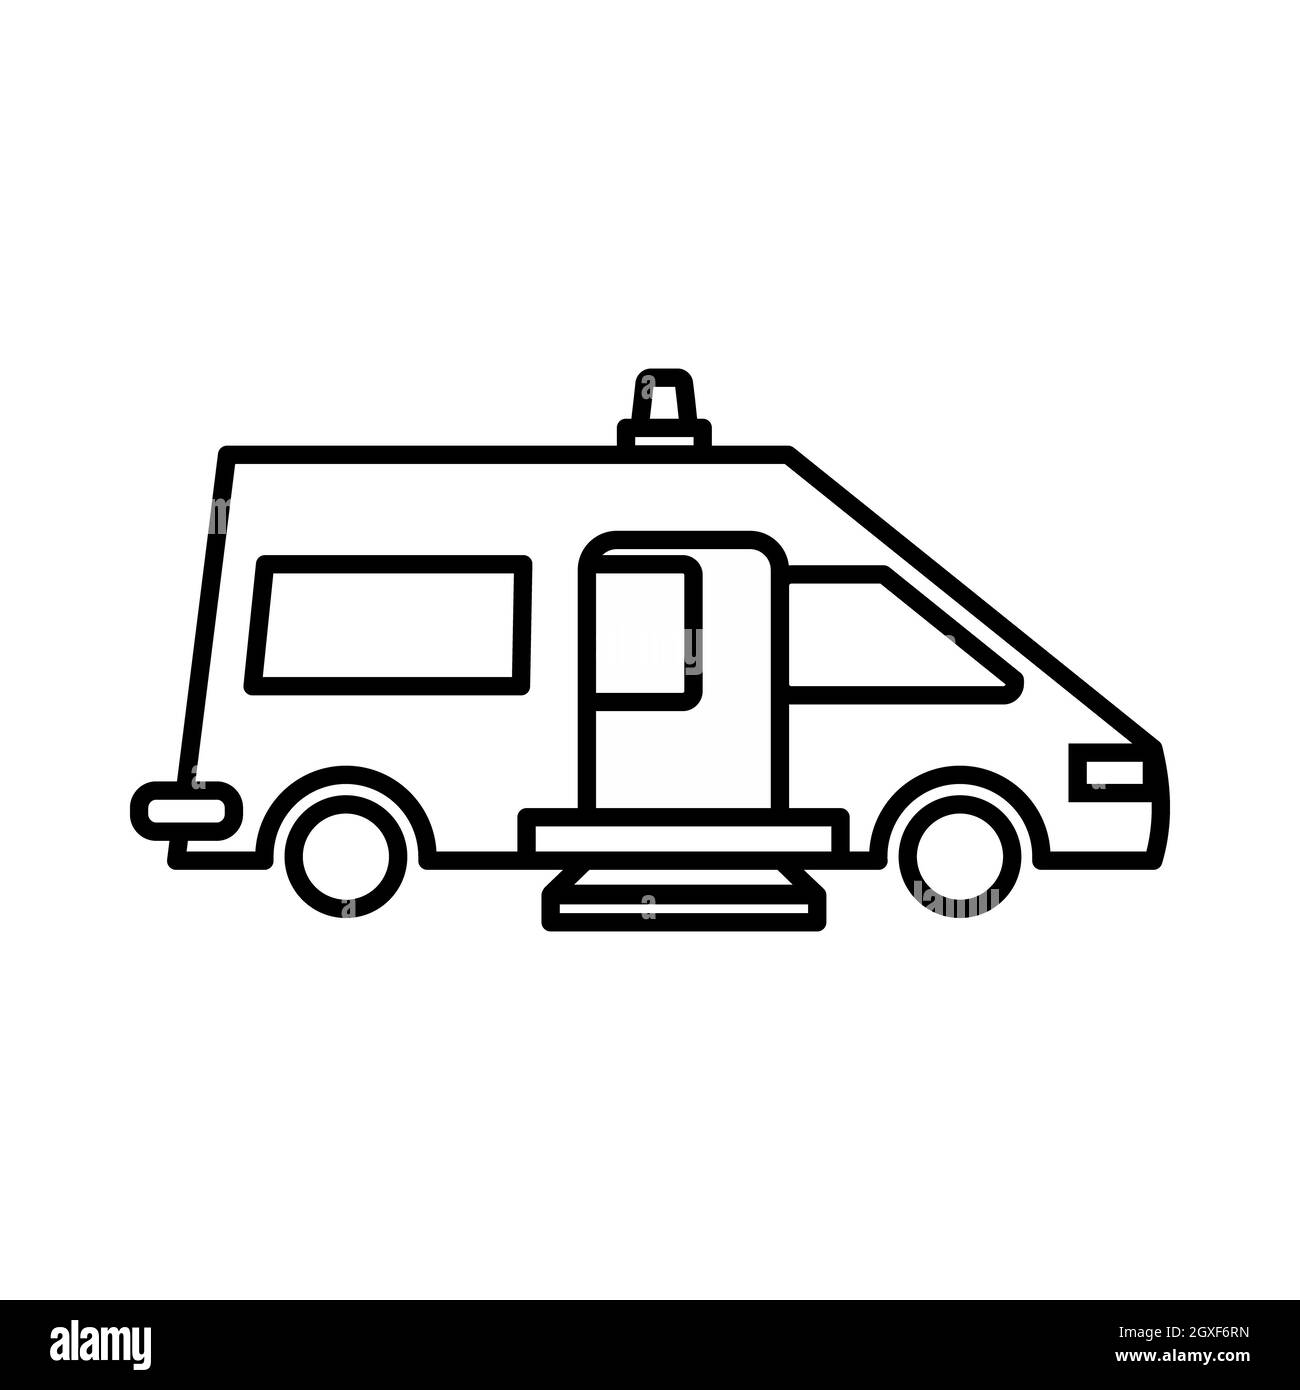 Ambulance icon in outline style isolated on white background Stock Photo